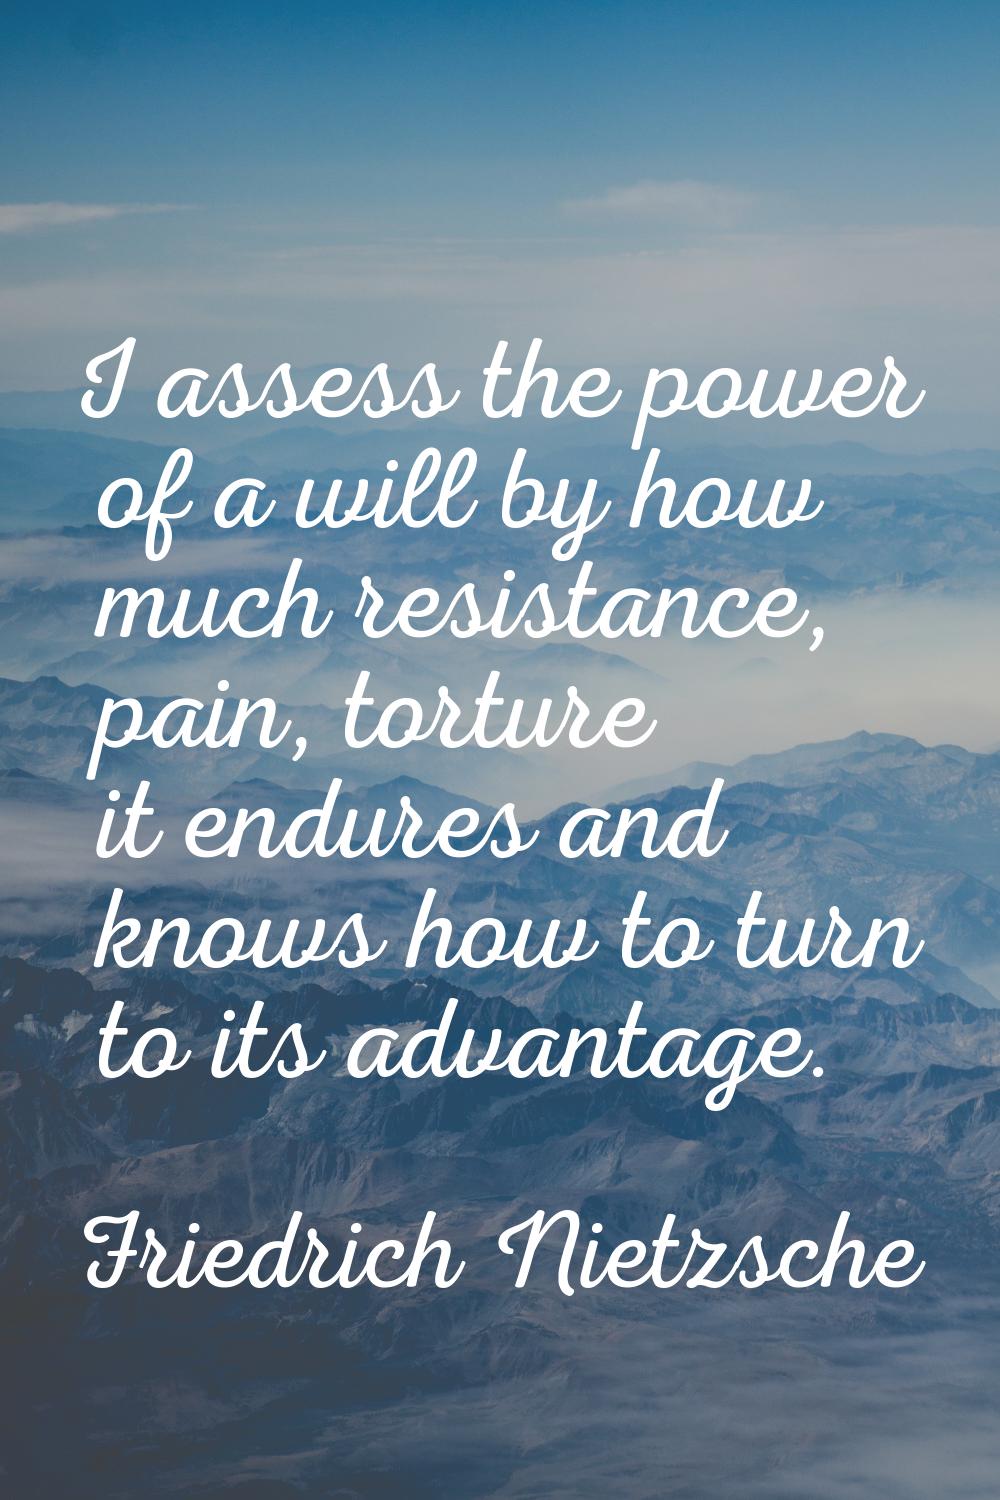 I assess the power of a will by how much resistance, pain, torture it endures and knows how to turn